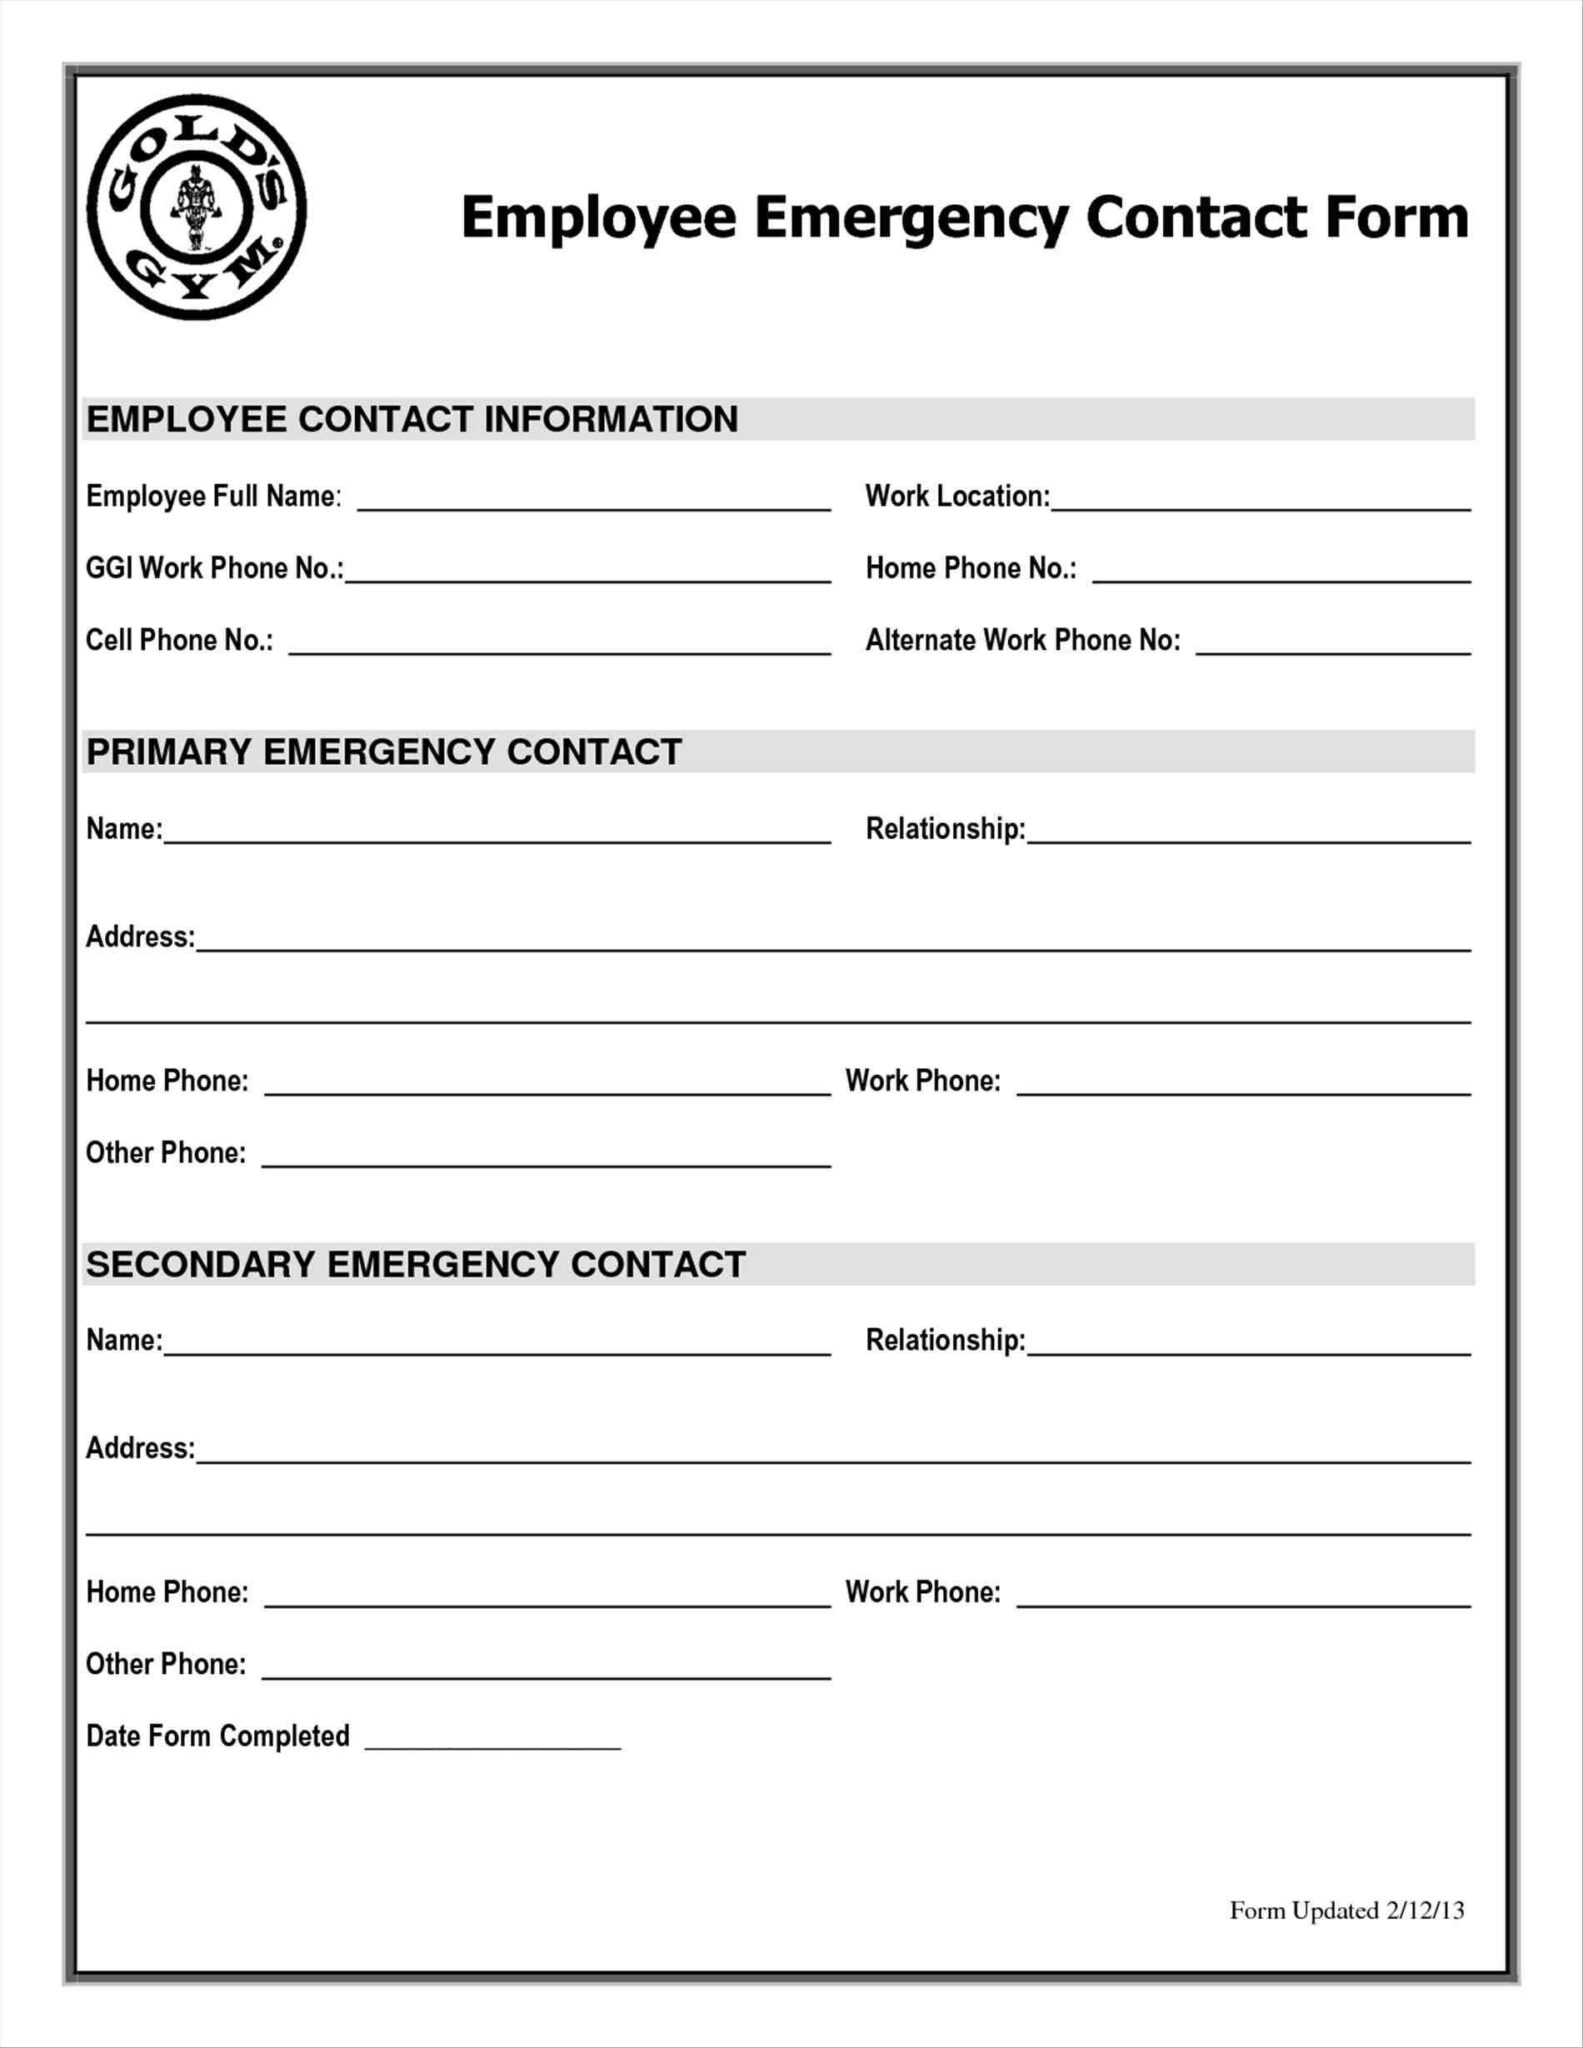 emergency-contact-form-template-word-dattstar-inside-emergency-contact-card-template